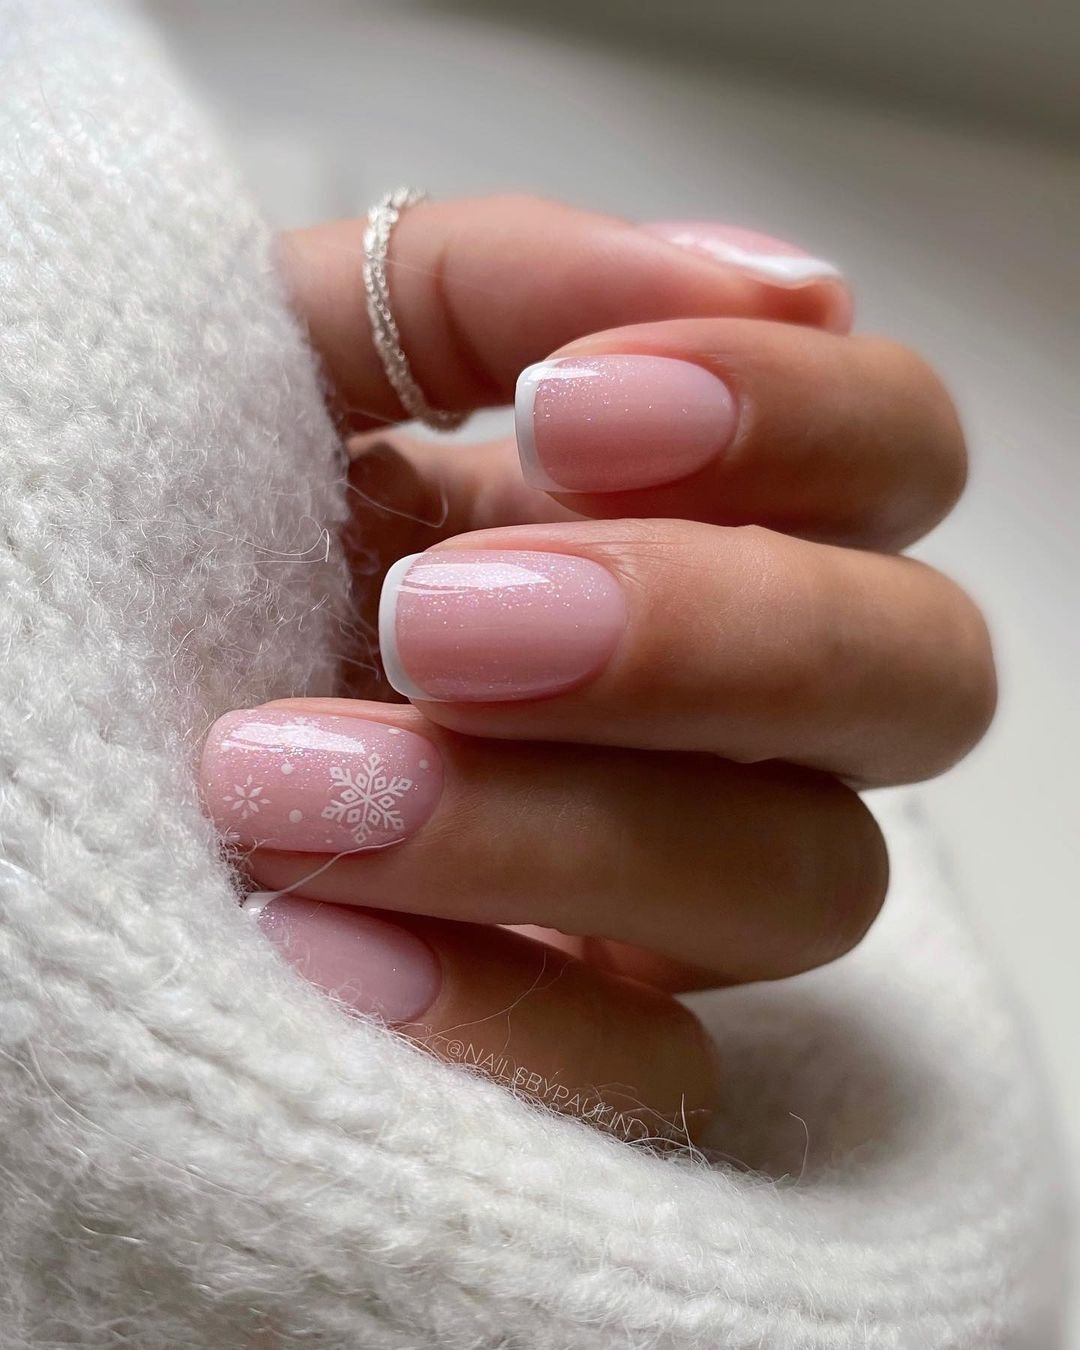 45 Trendy Winter Nail Designs You Need To Try Out This Season